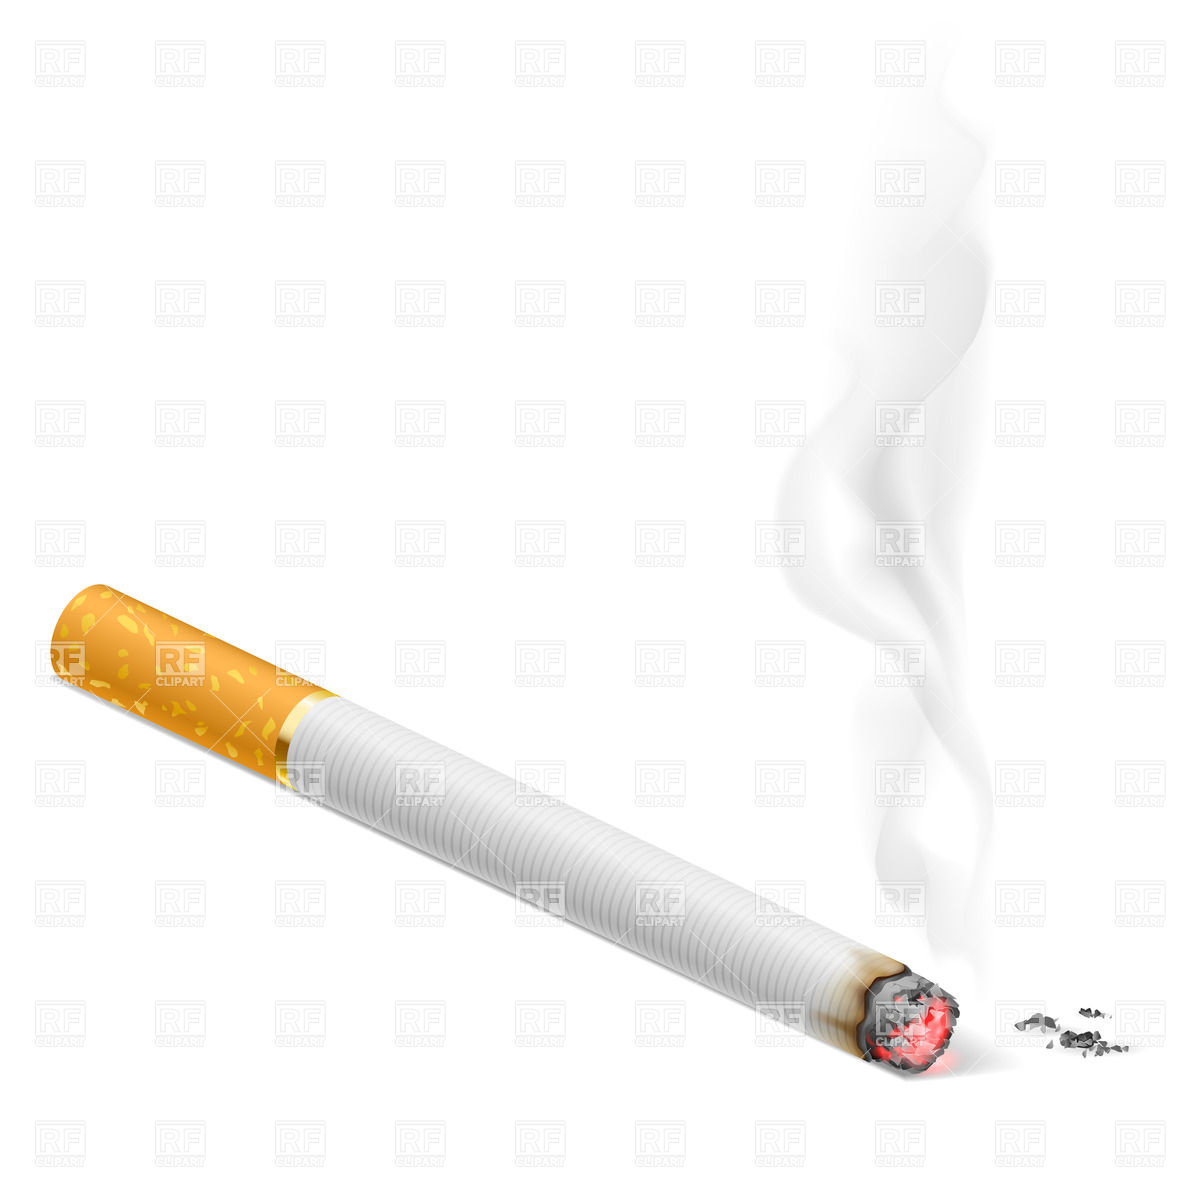 Realistic Smoking Cigarette 20516 Objects Download Royalty Free    